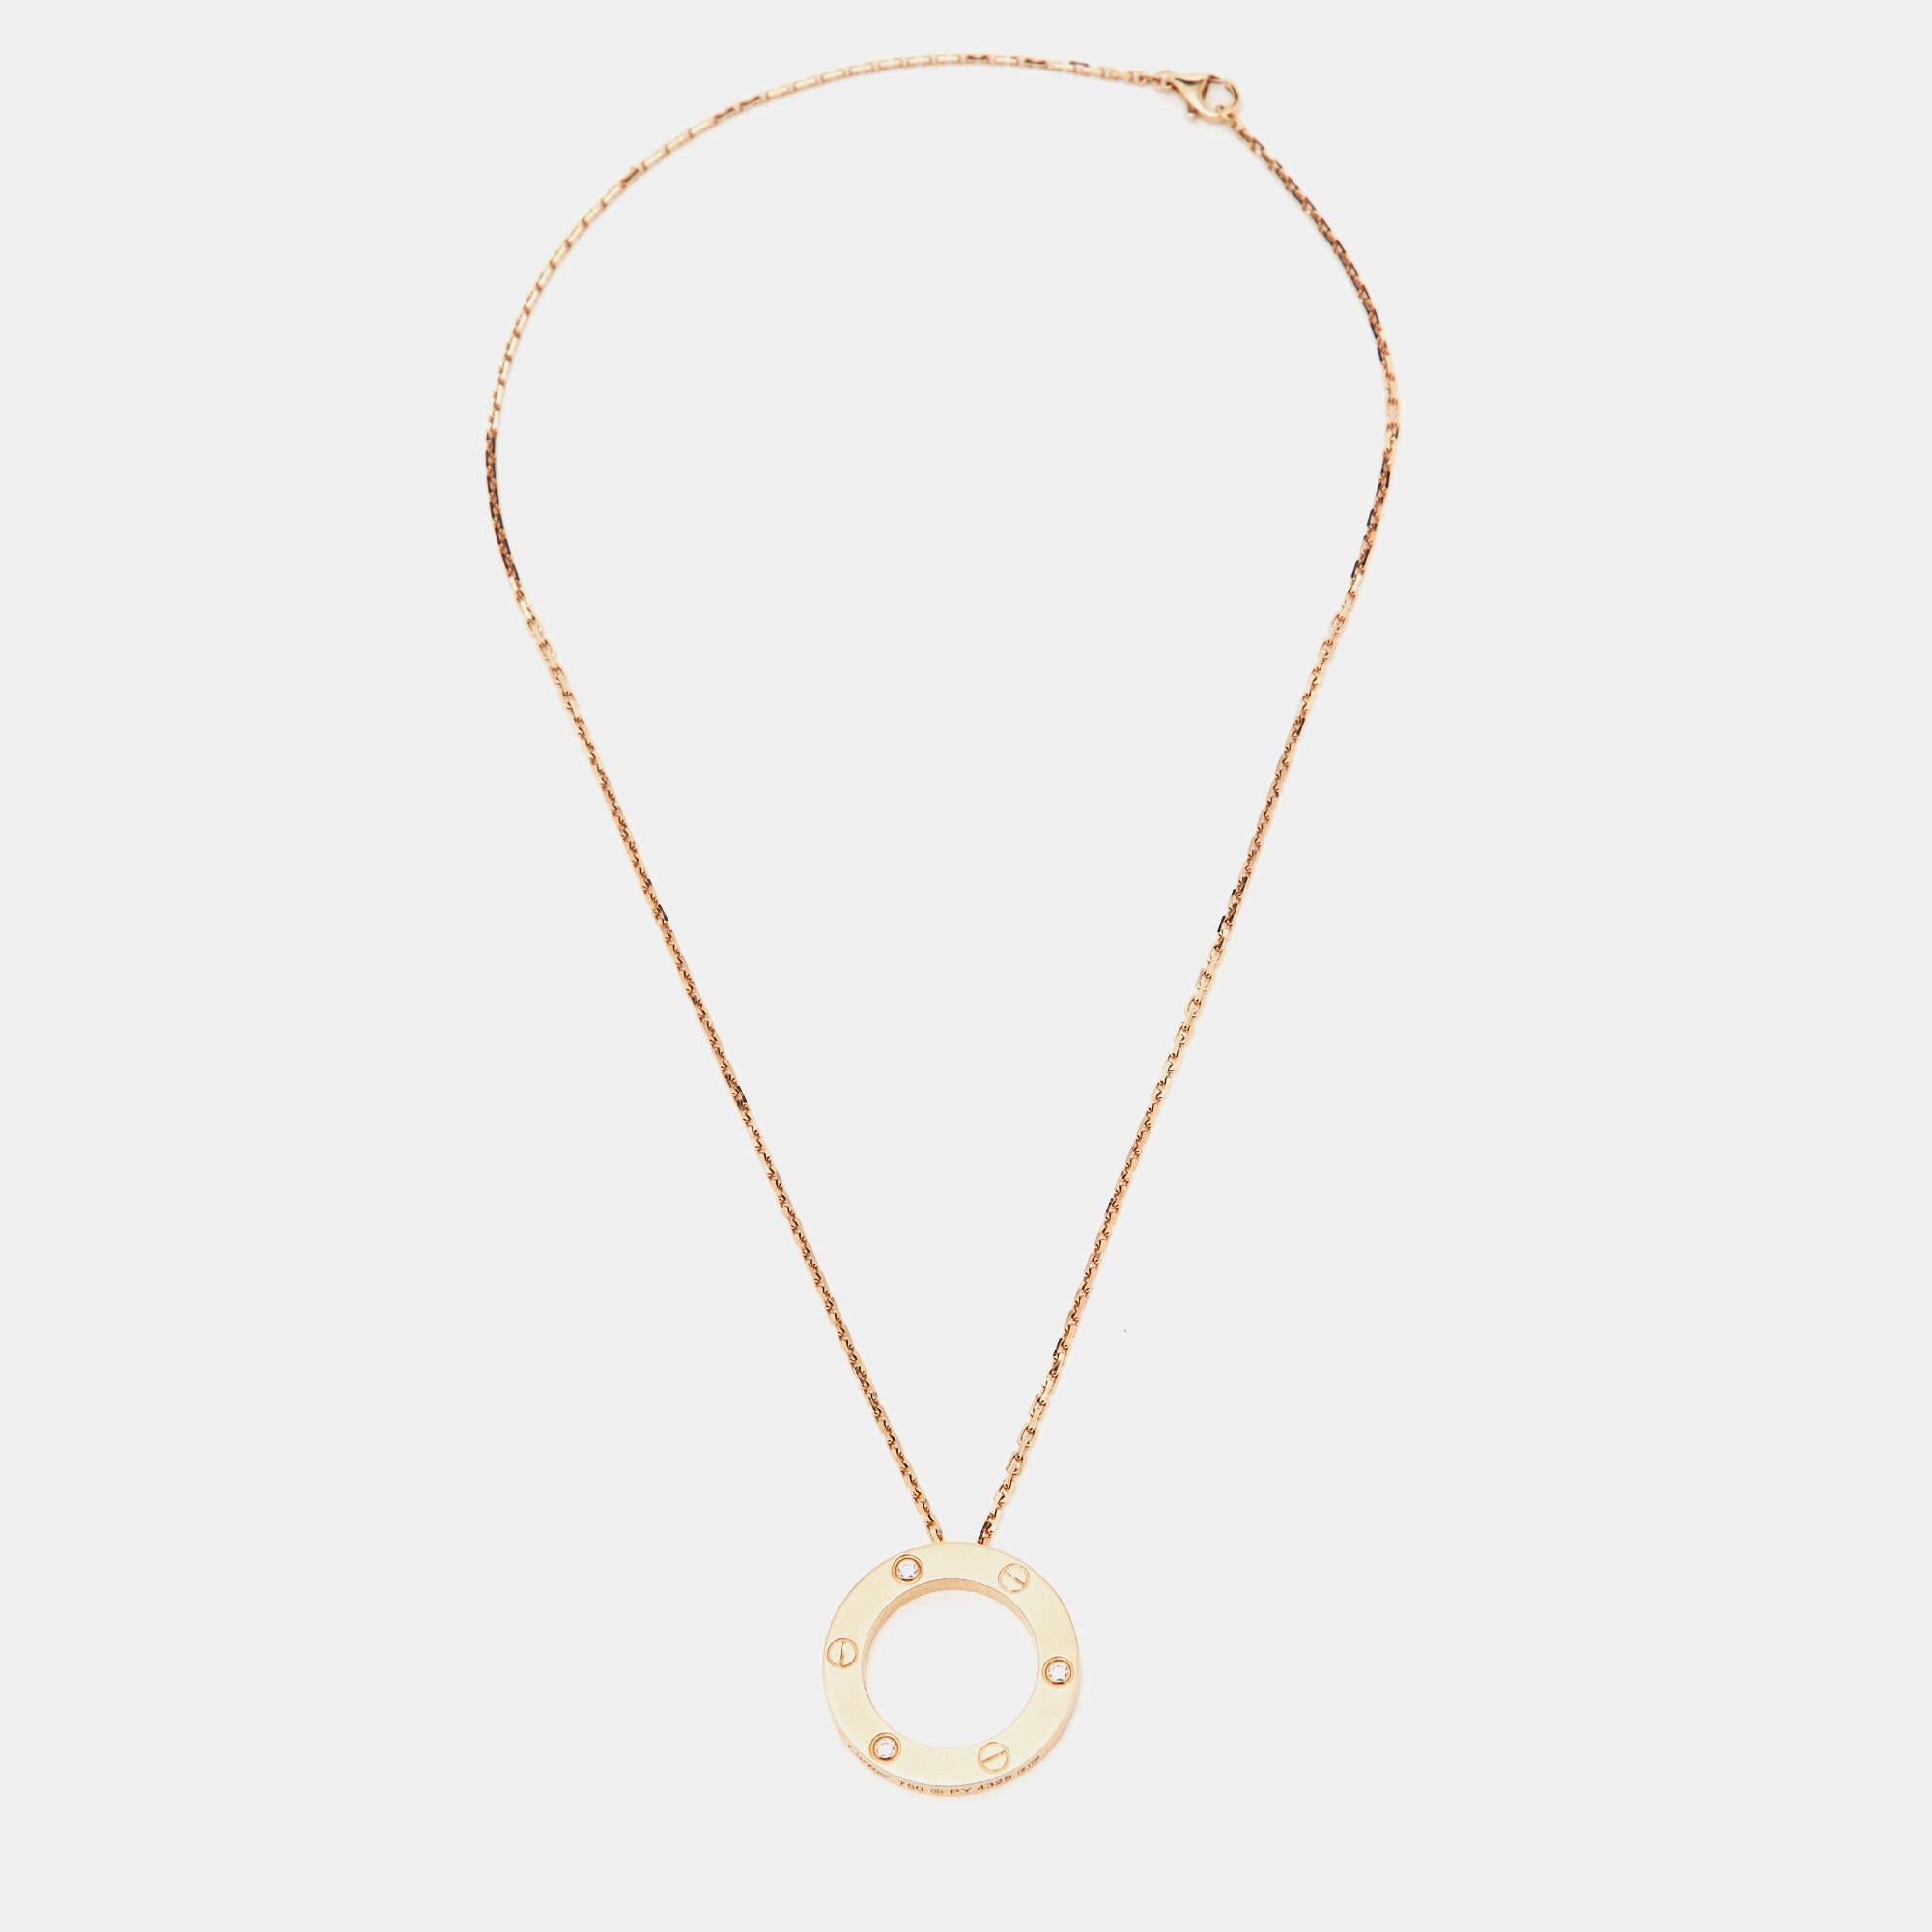 This radiant Love necklace from Cartier is not only beautiful to look at but is also a timeless piece that will be cherished for years to come. It has been crafted from 18K rose gold and features a chain-link carrying a ring pendant detailed with